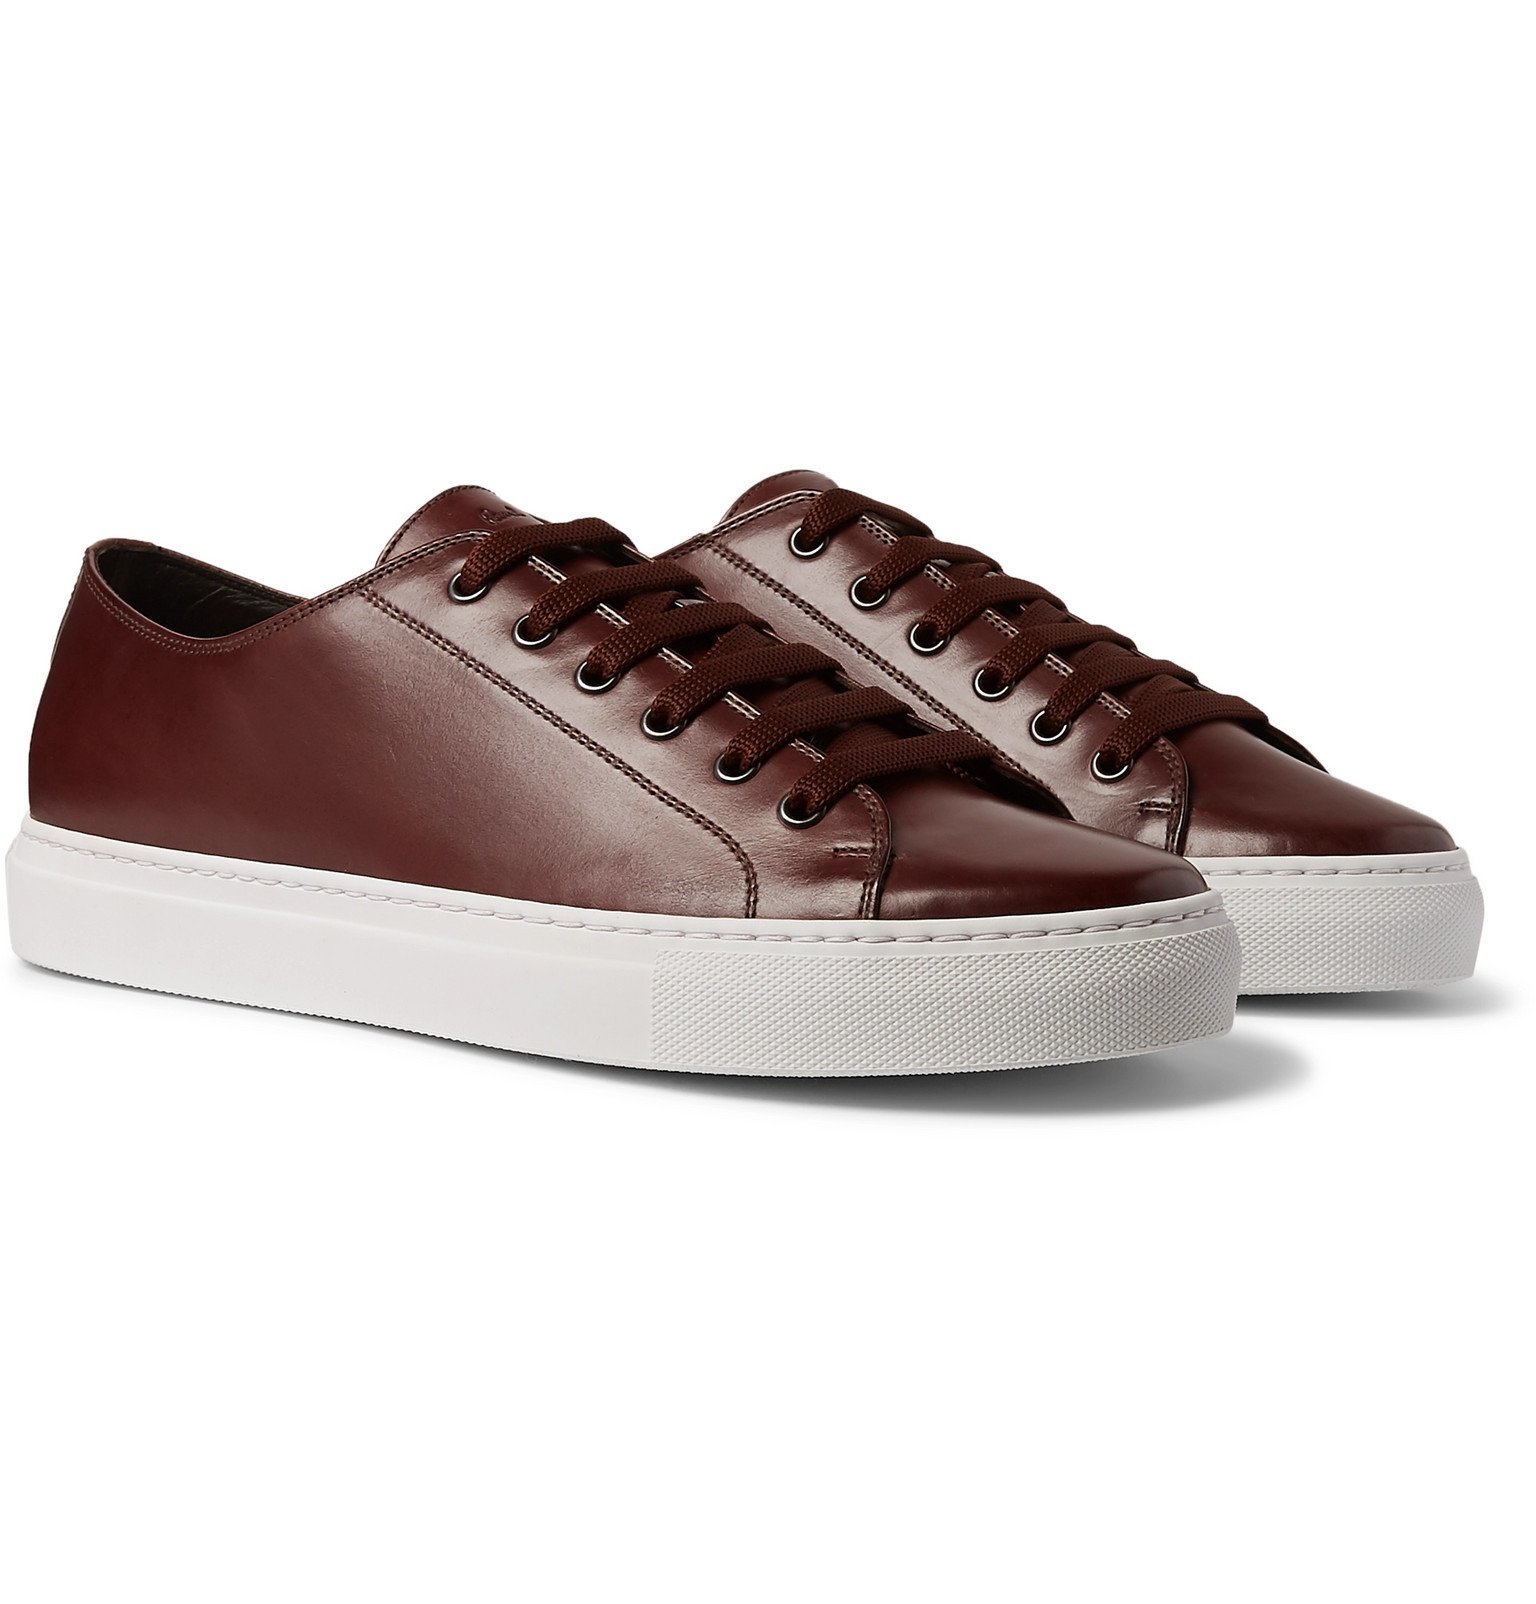 Paul Smith - Sotto Burnished-Leather Sneakers - Brown Paul Smith